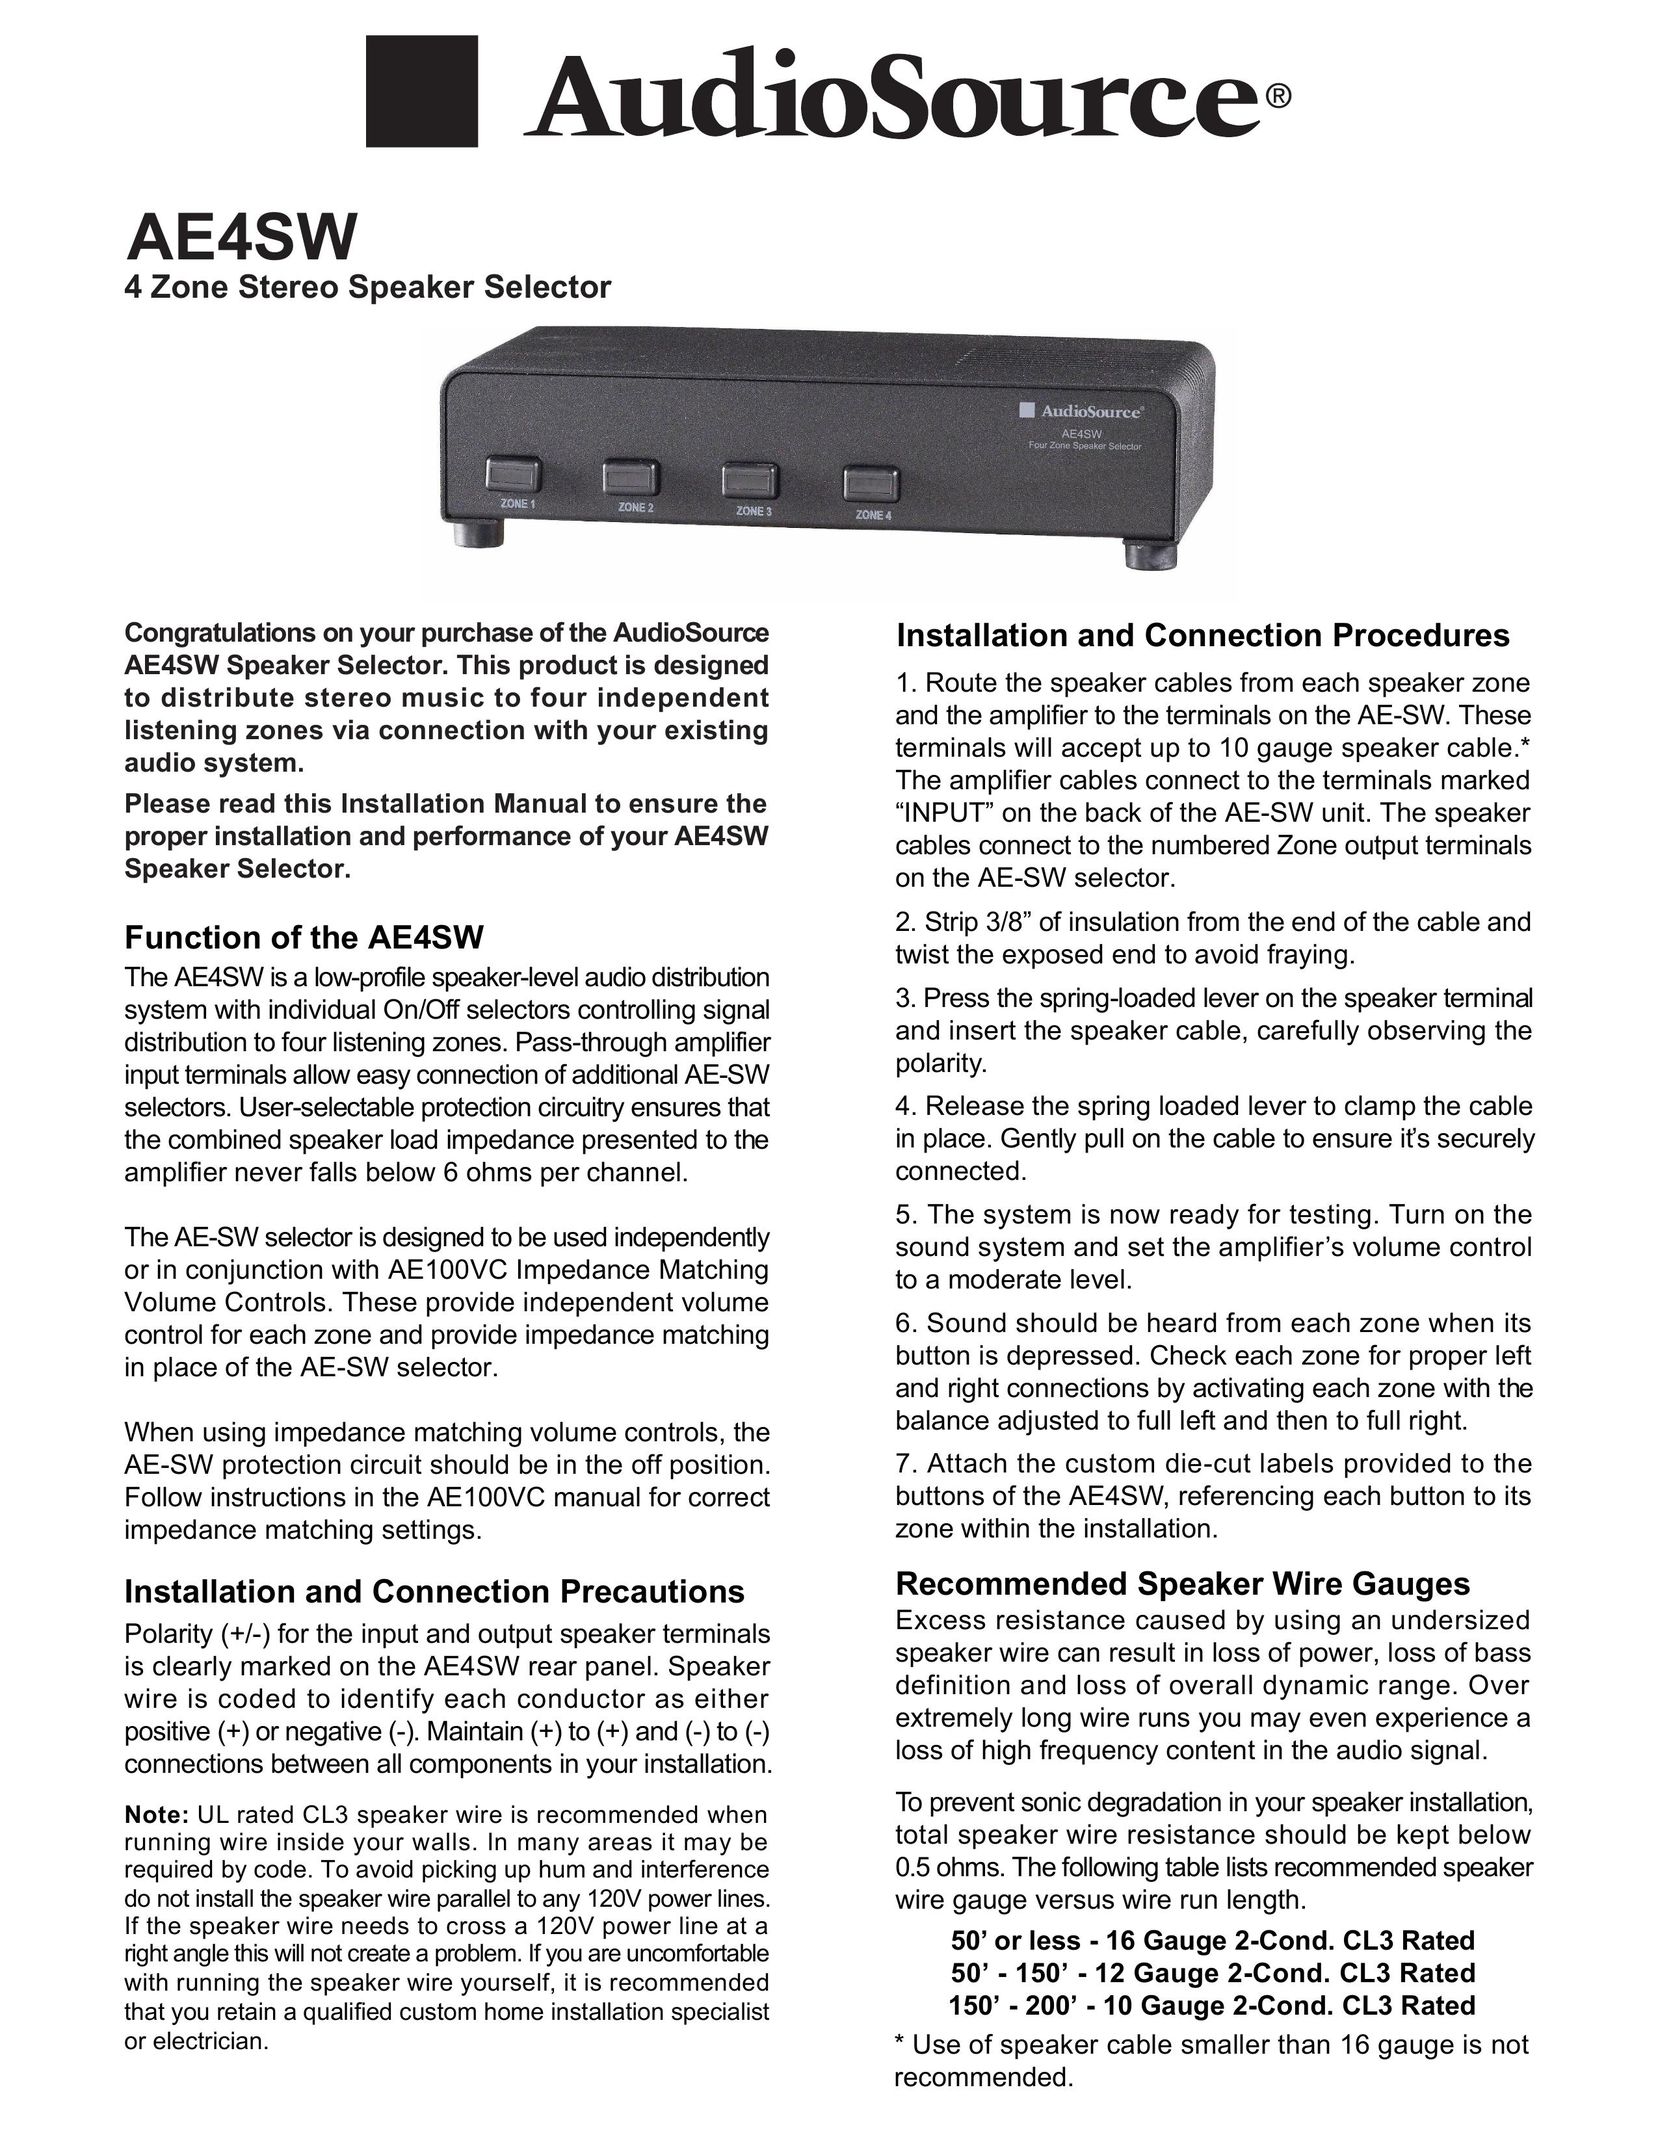 AudioSource AE4SW Portable Stereo System User Manual